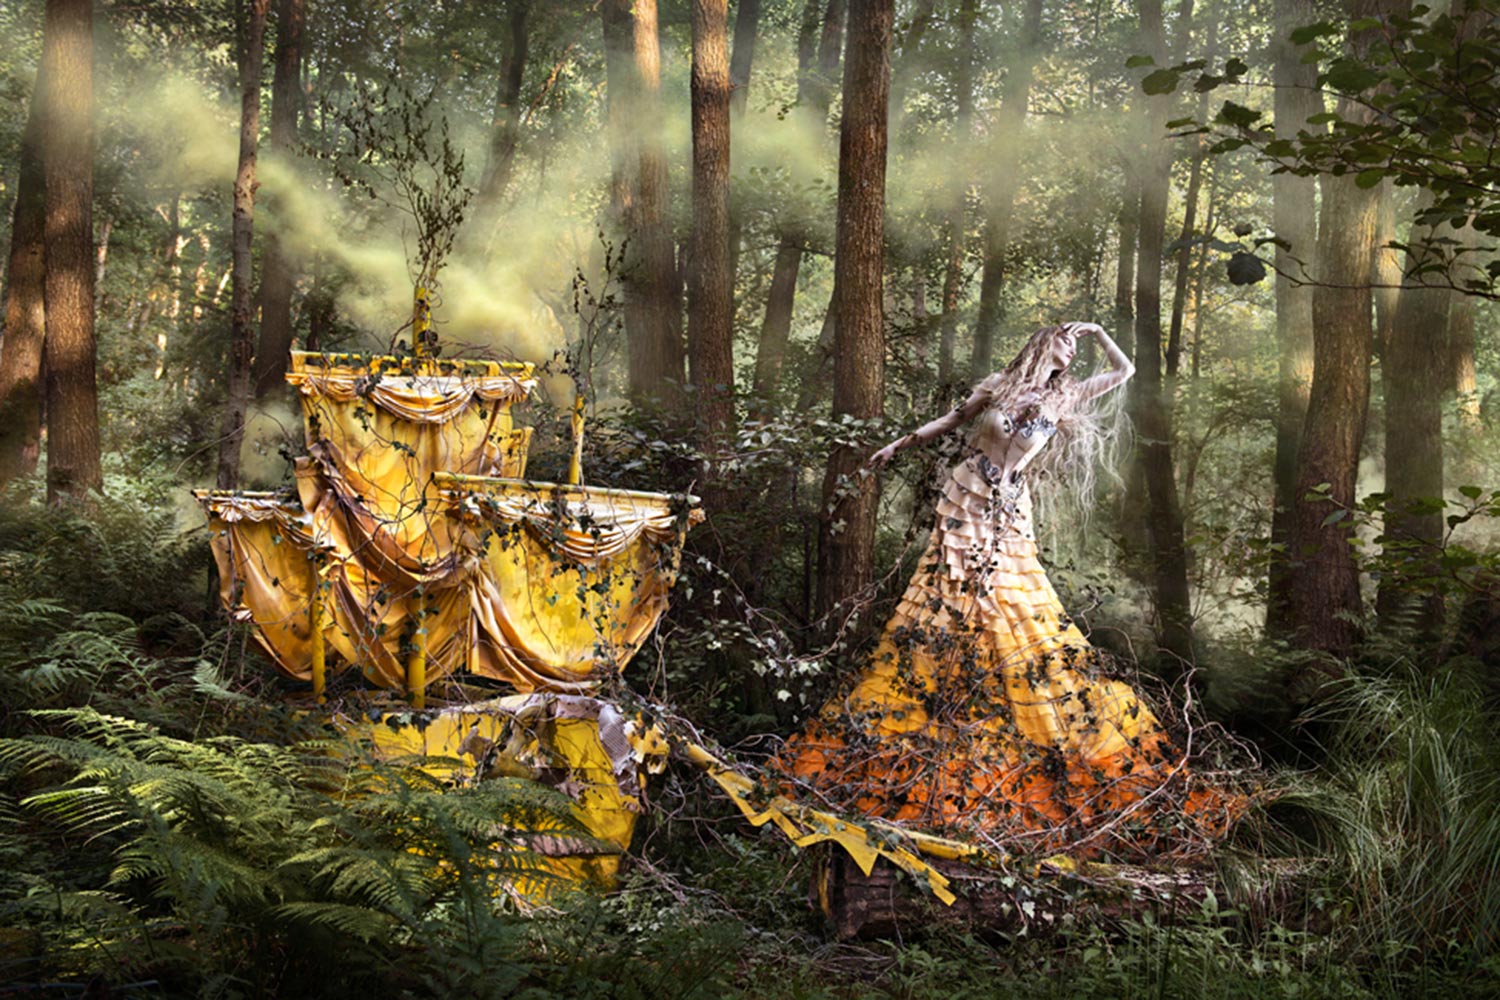 Shell-Wait-For-You-In-The-Shadows-Of-Summer-Kirsty Mitchell